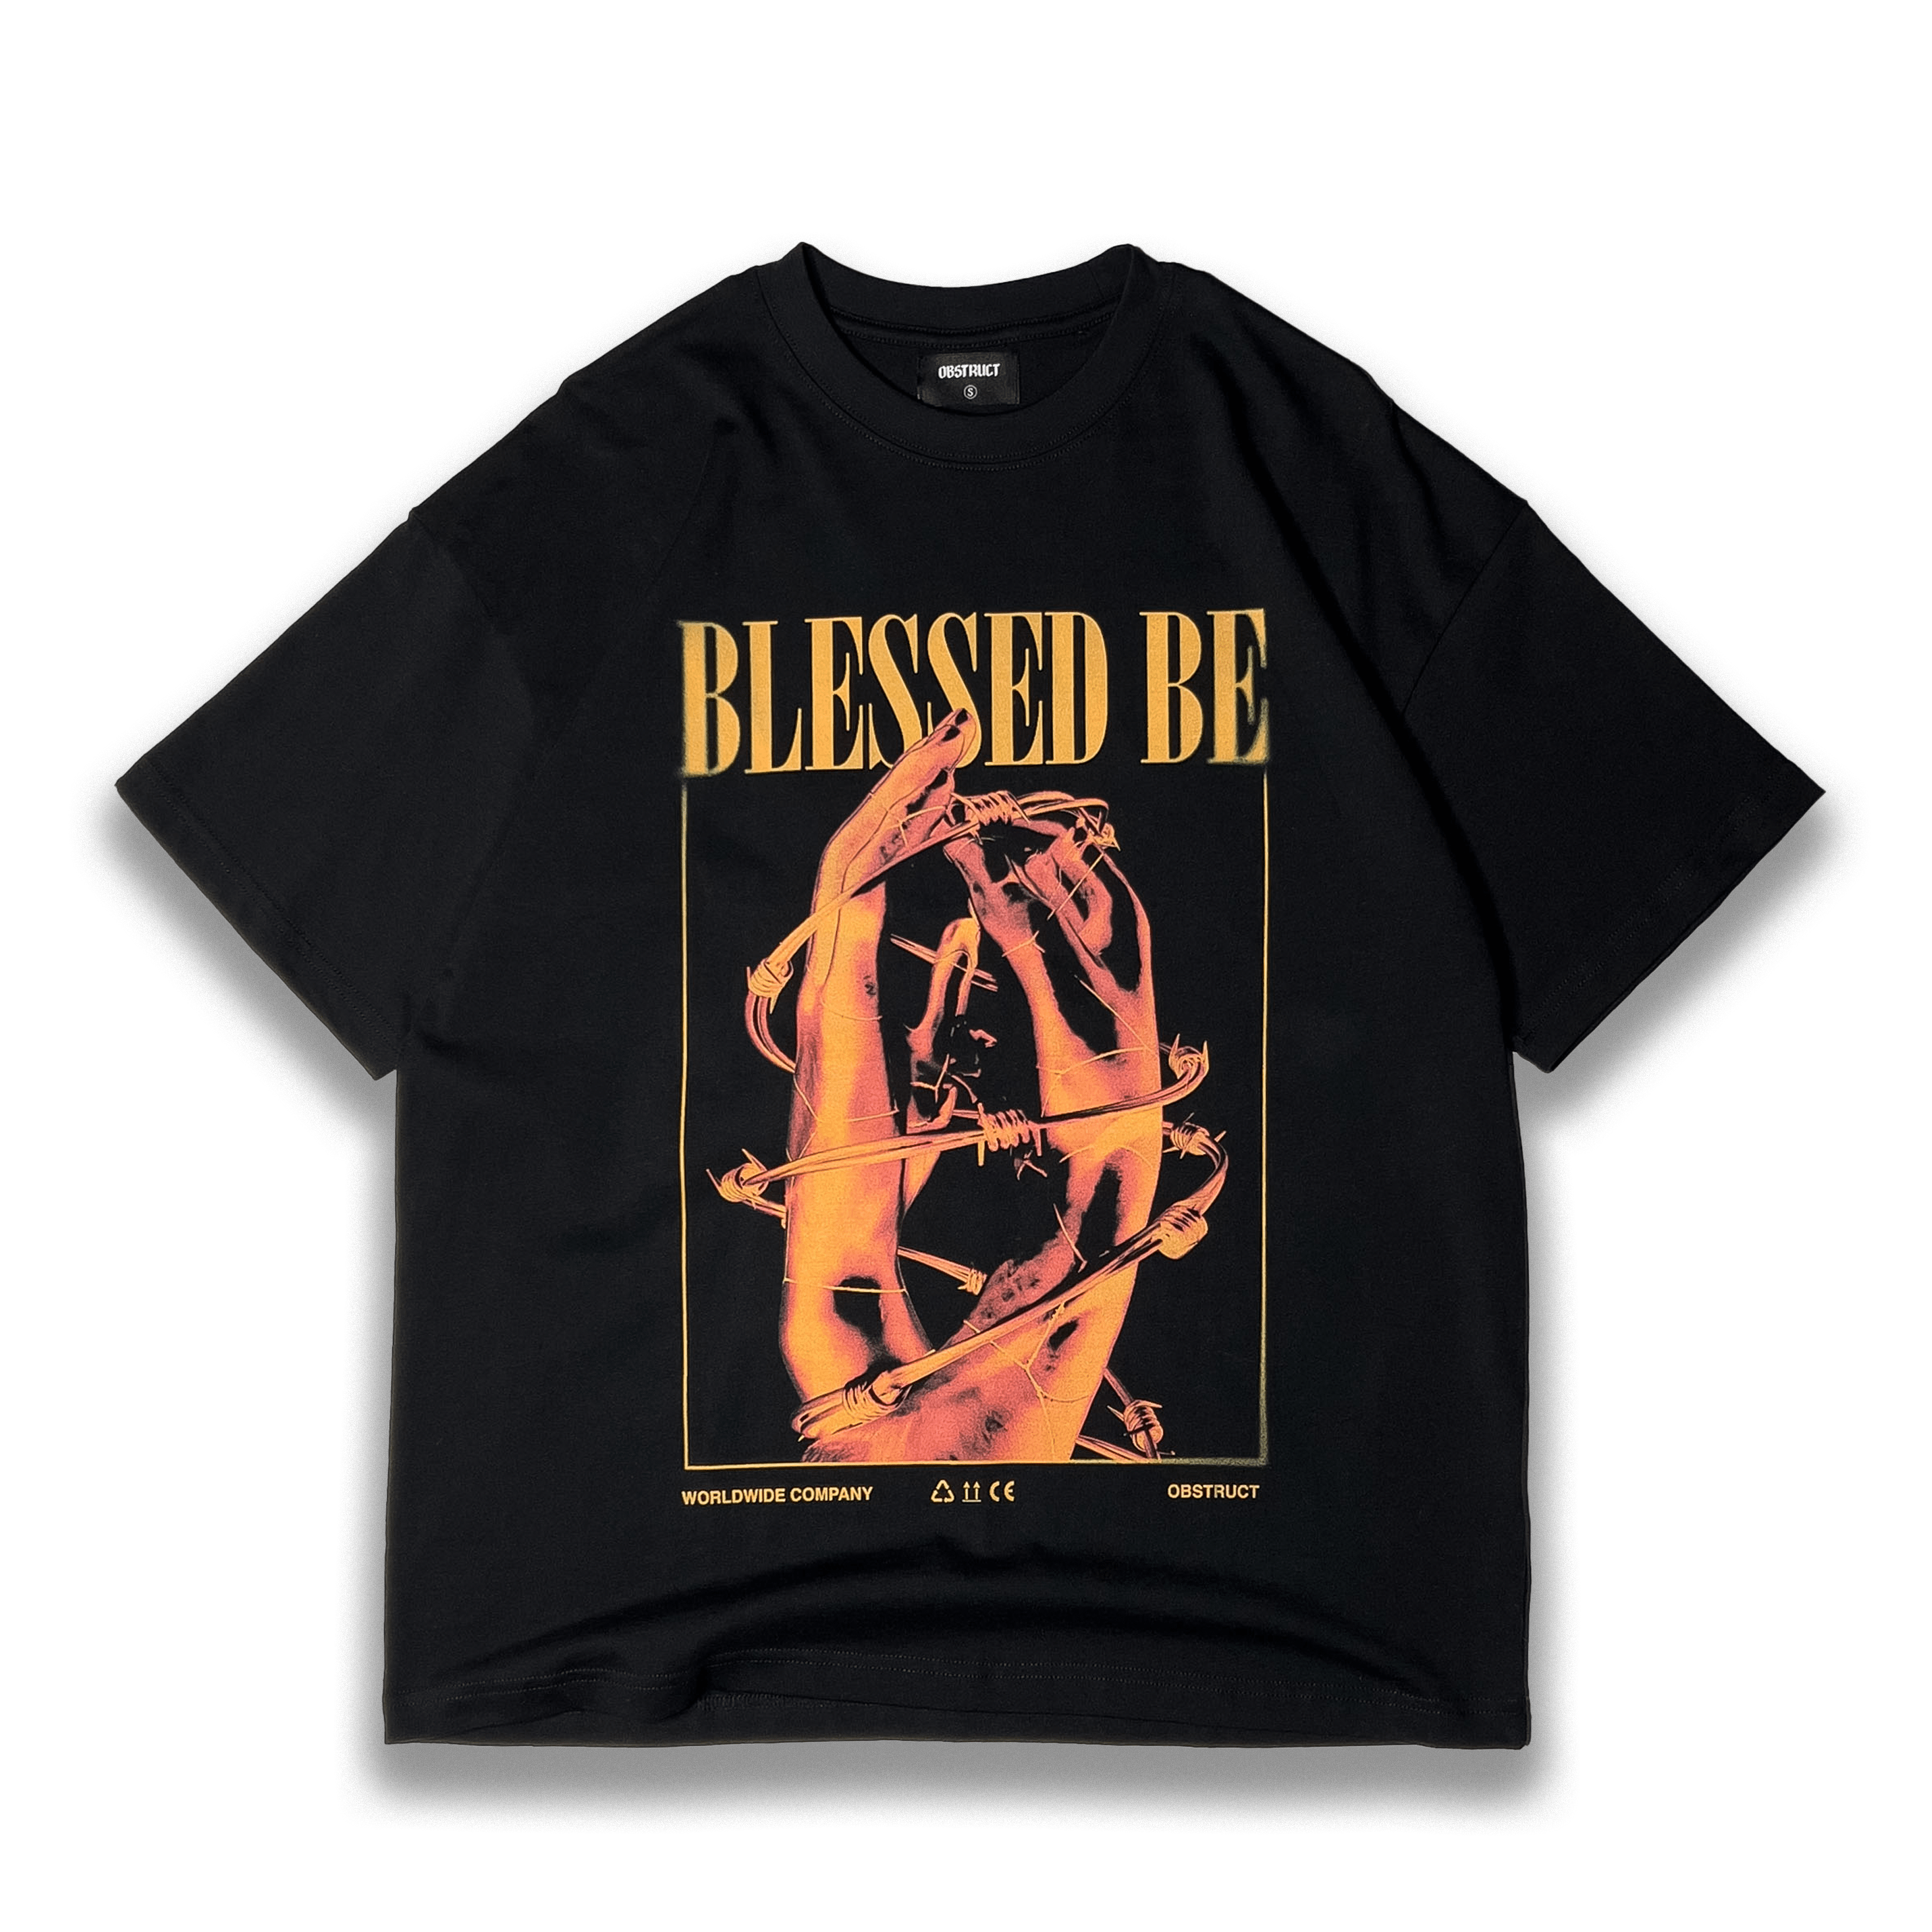 Blessed Be T-Shirt – obstructstore